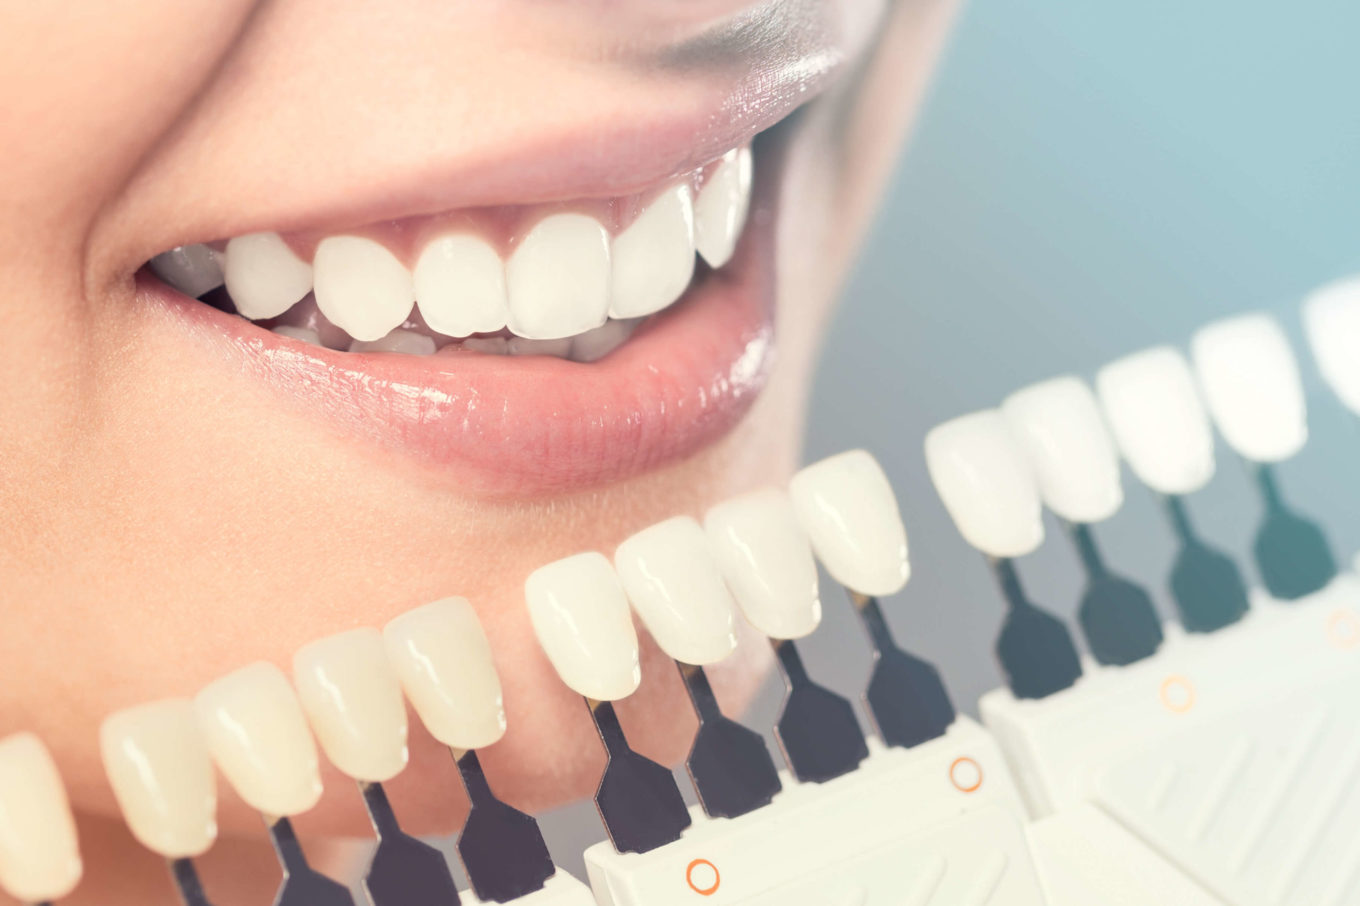 what is cosmetic dentistry